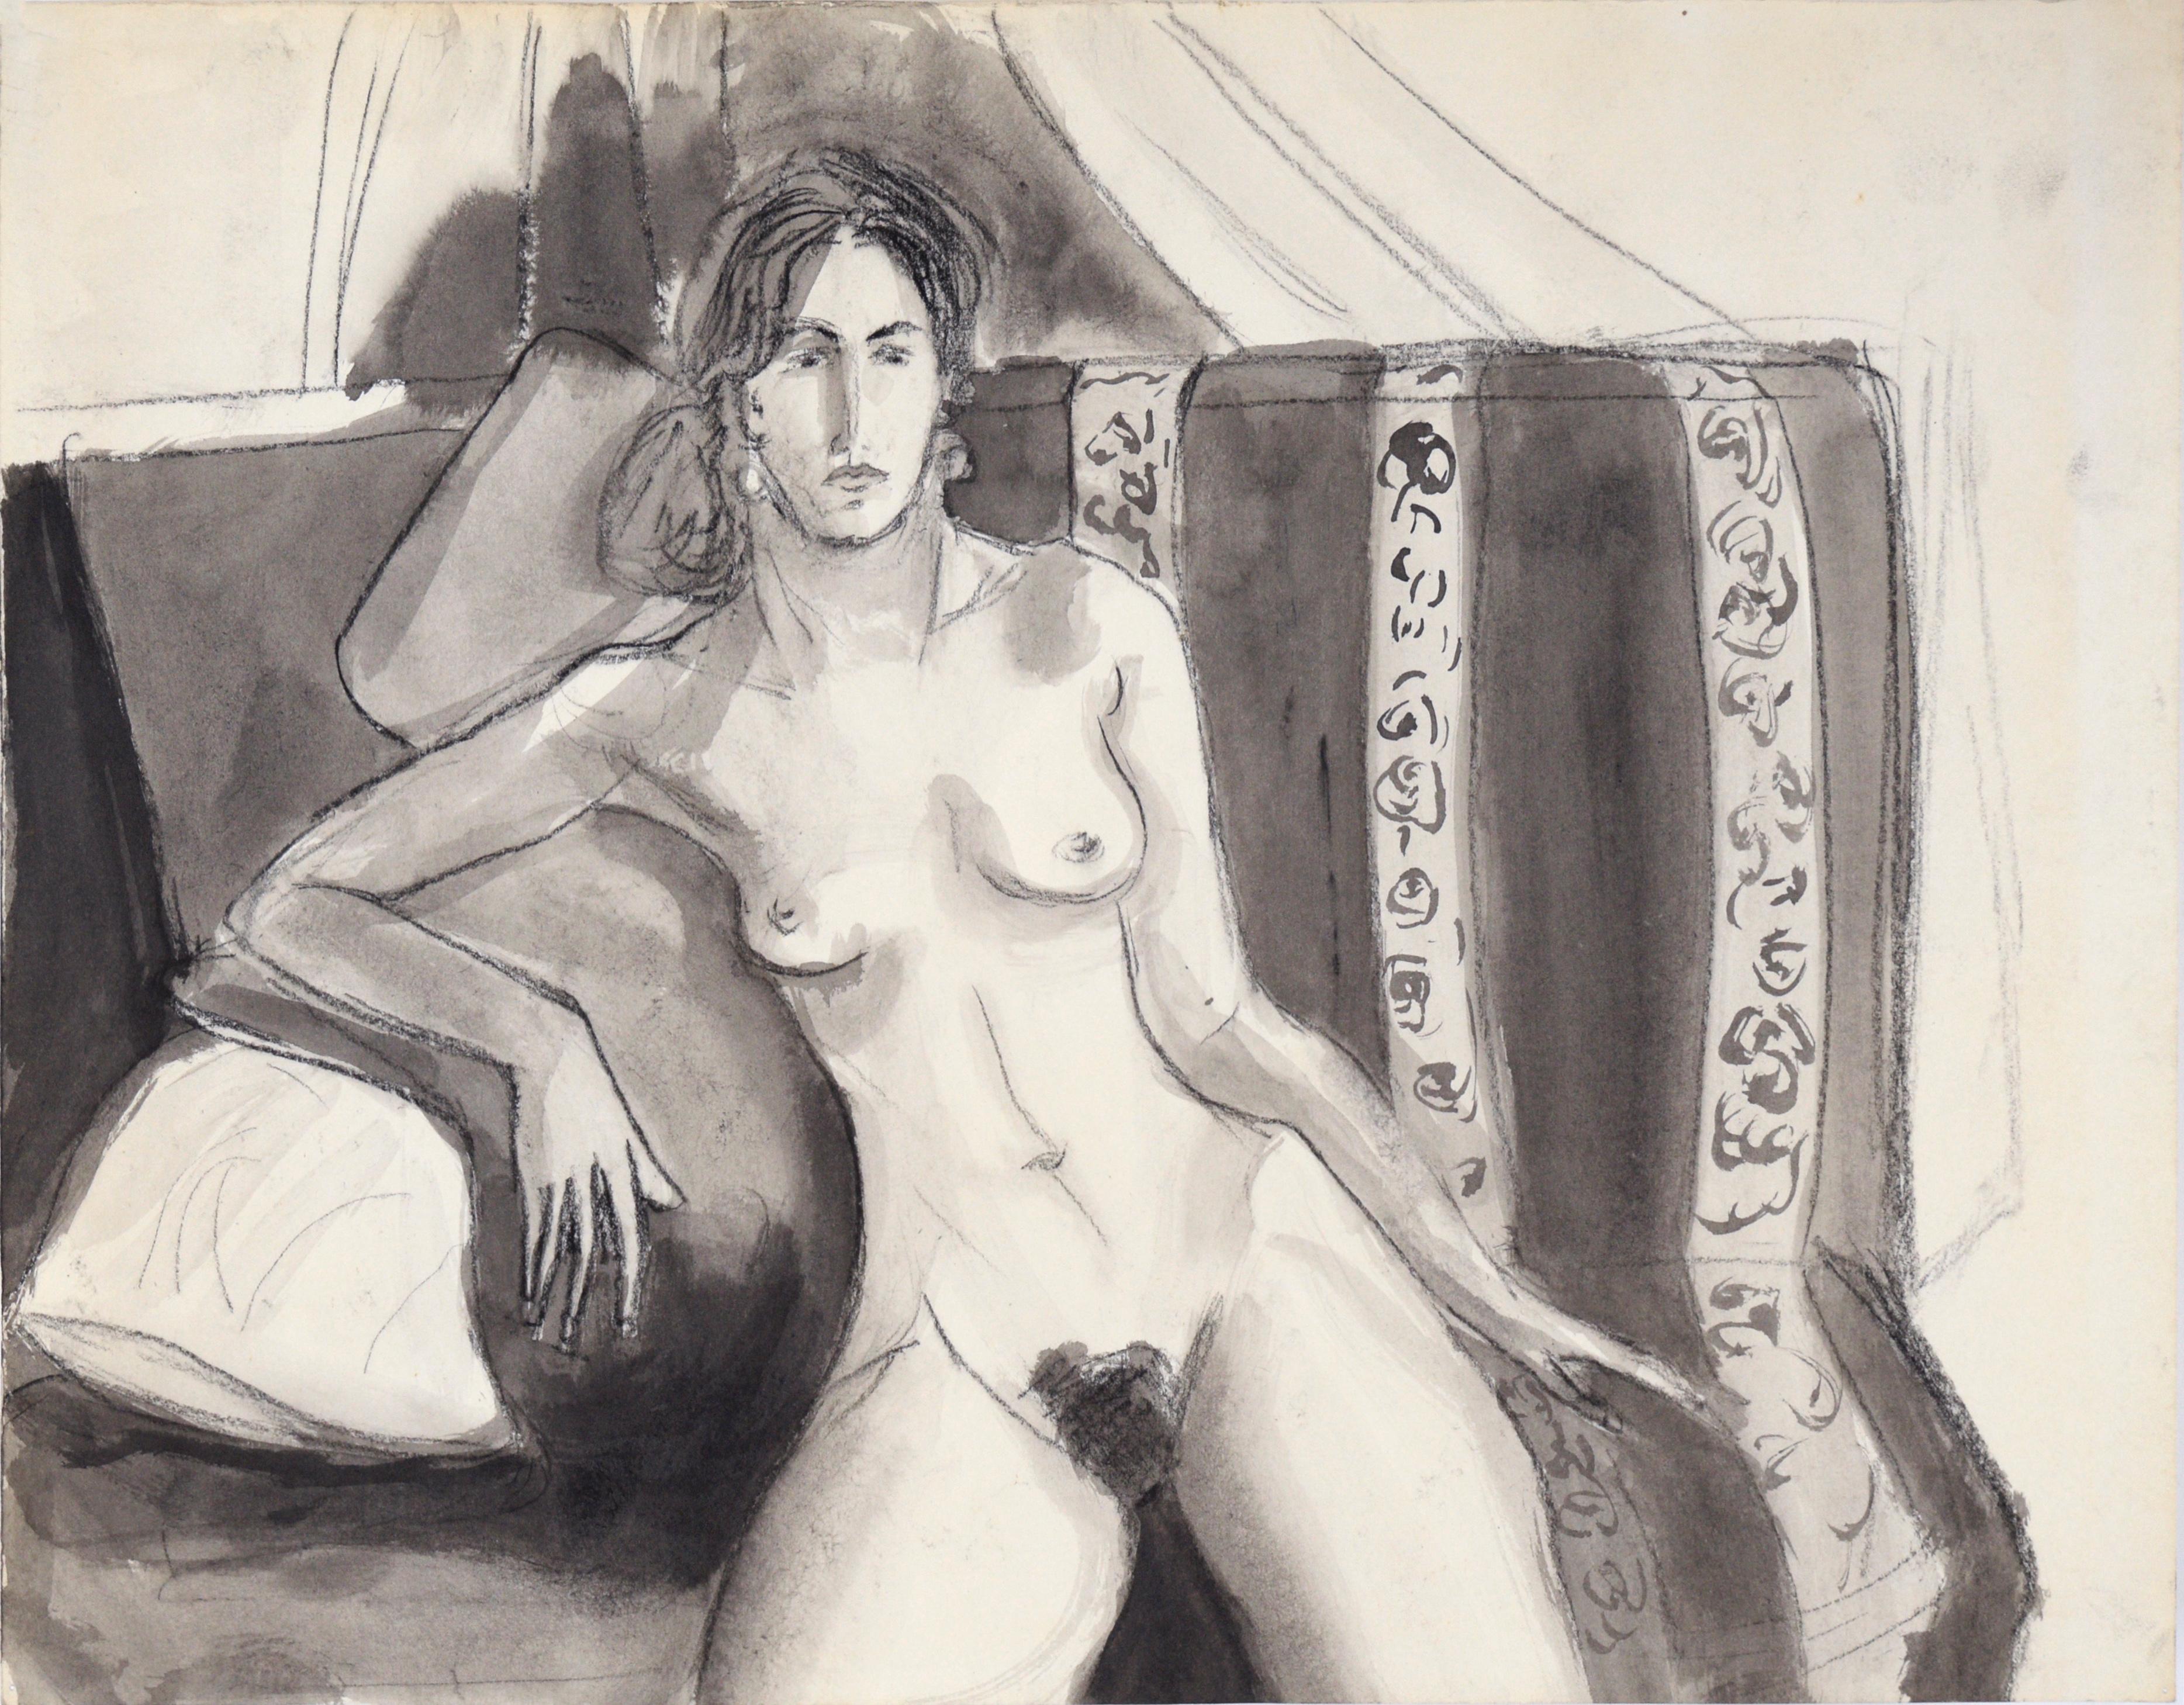 Katherine Kallick Nude Painting - Nude Woman on Striped Chair #1 in Charcoal and Gouache on Paper